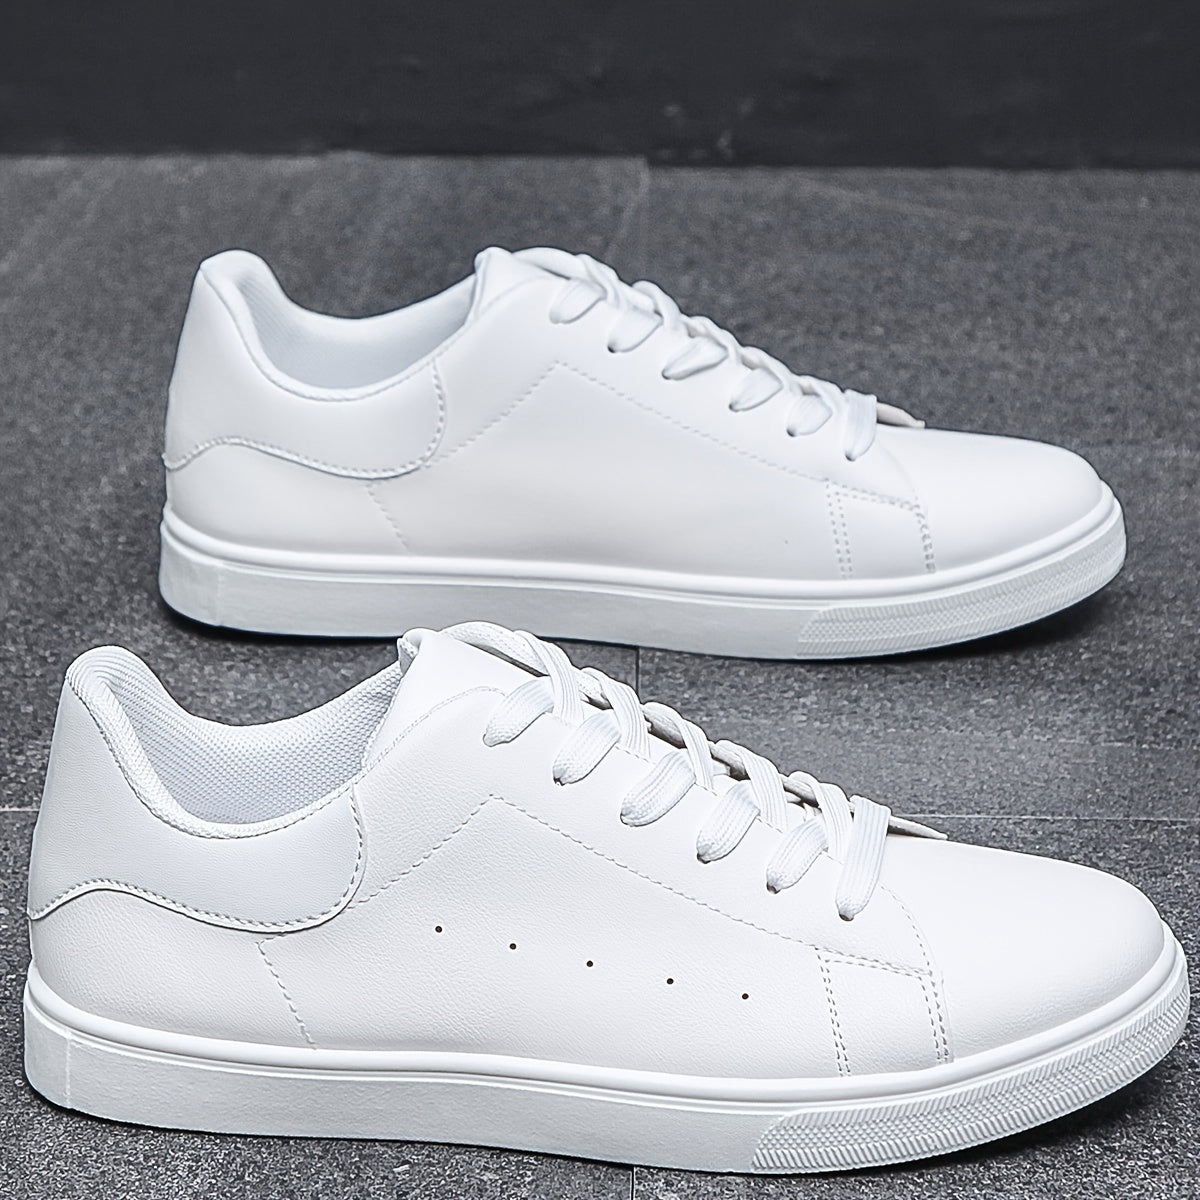 Breathable PU Leather Skate Shoes - Men's Lace-up Sneakers with Good Traction